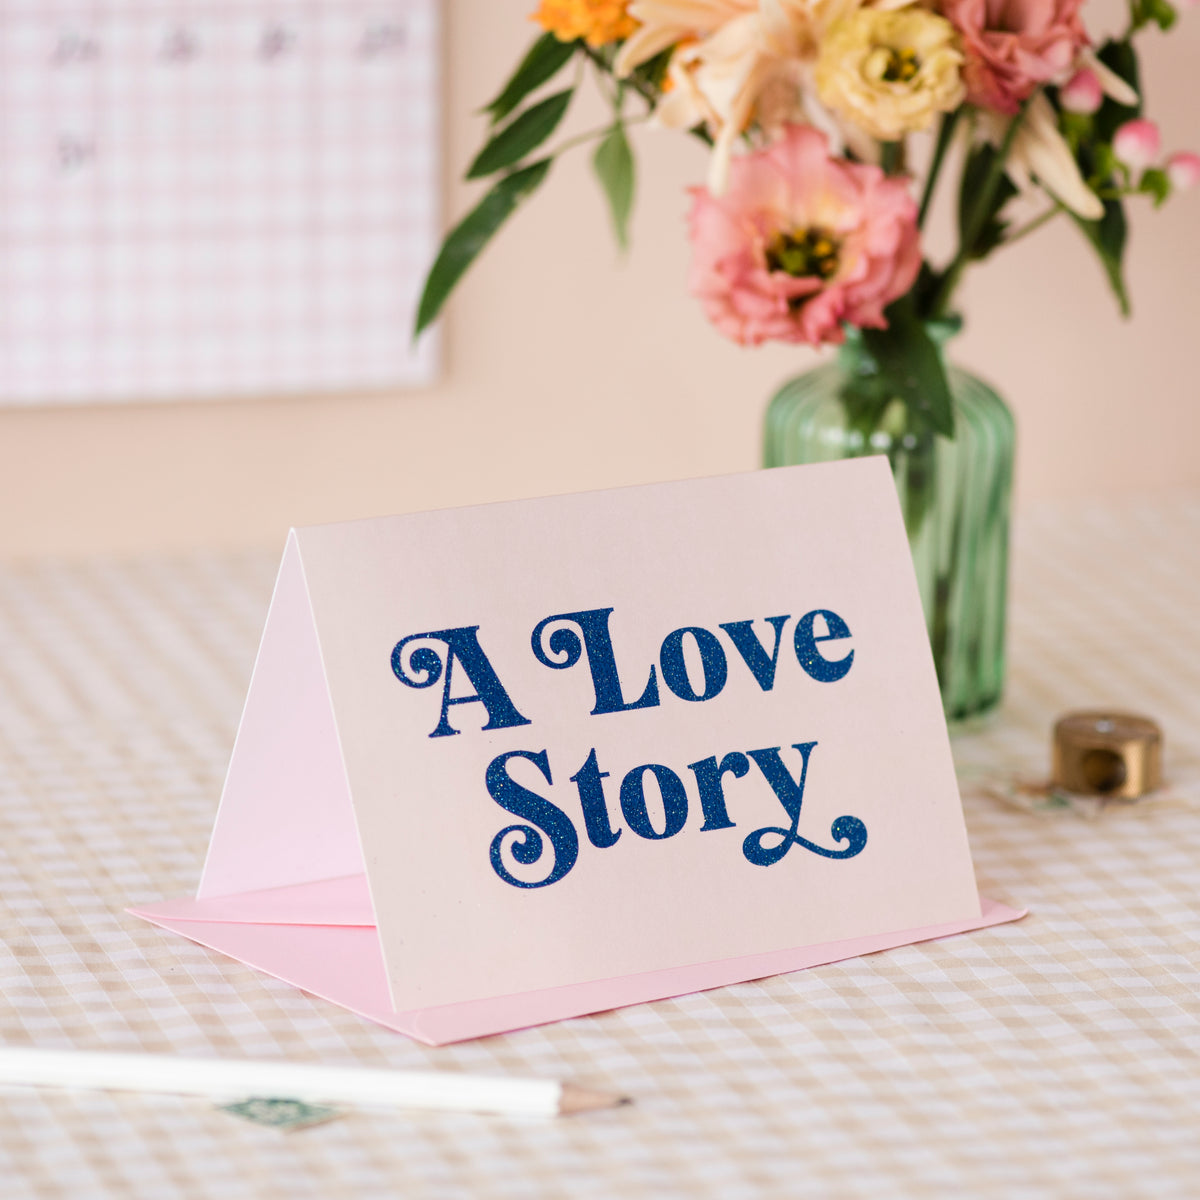 'A Love Story' Greetings Card - Biodegradable Glitter